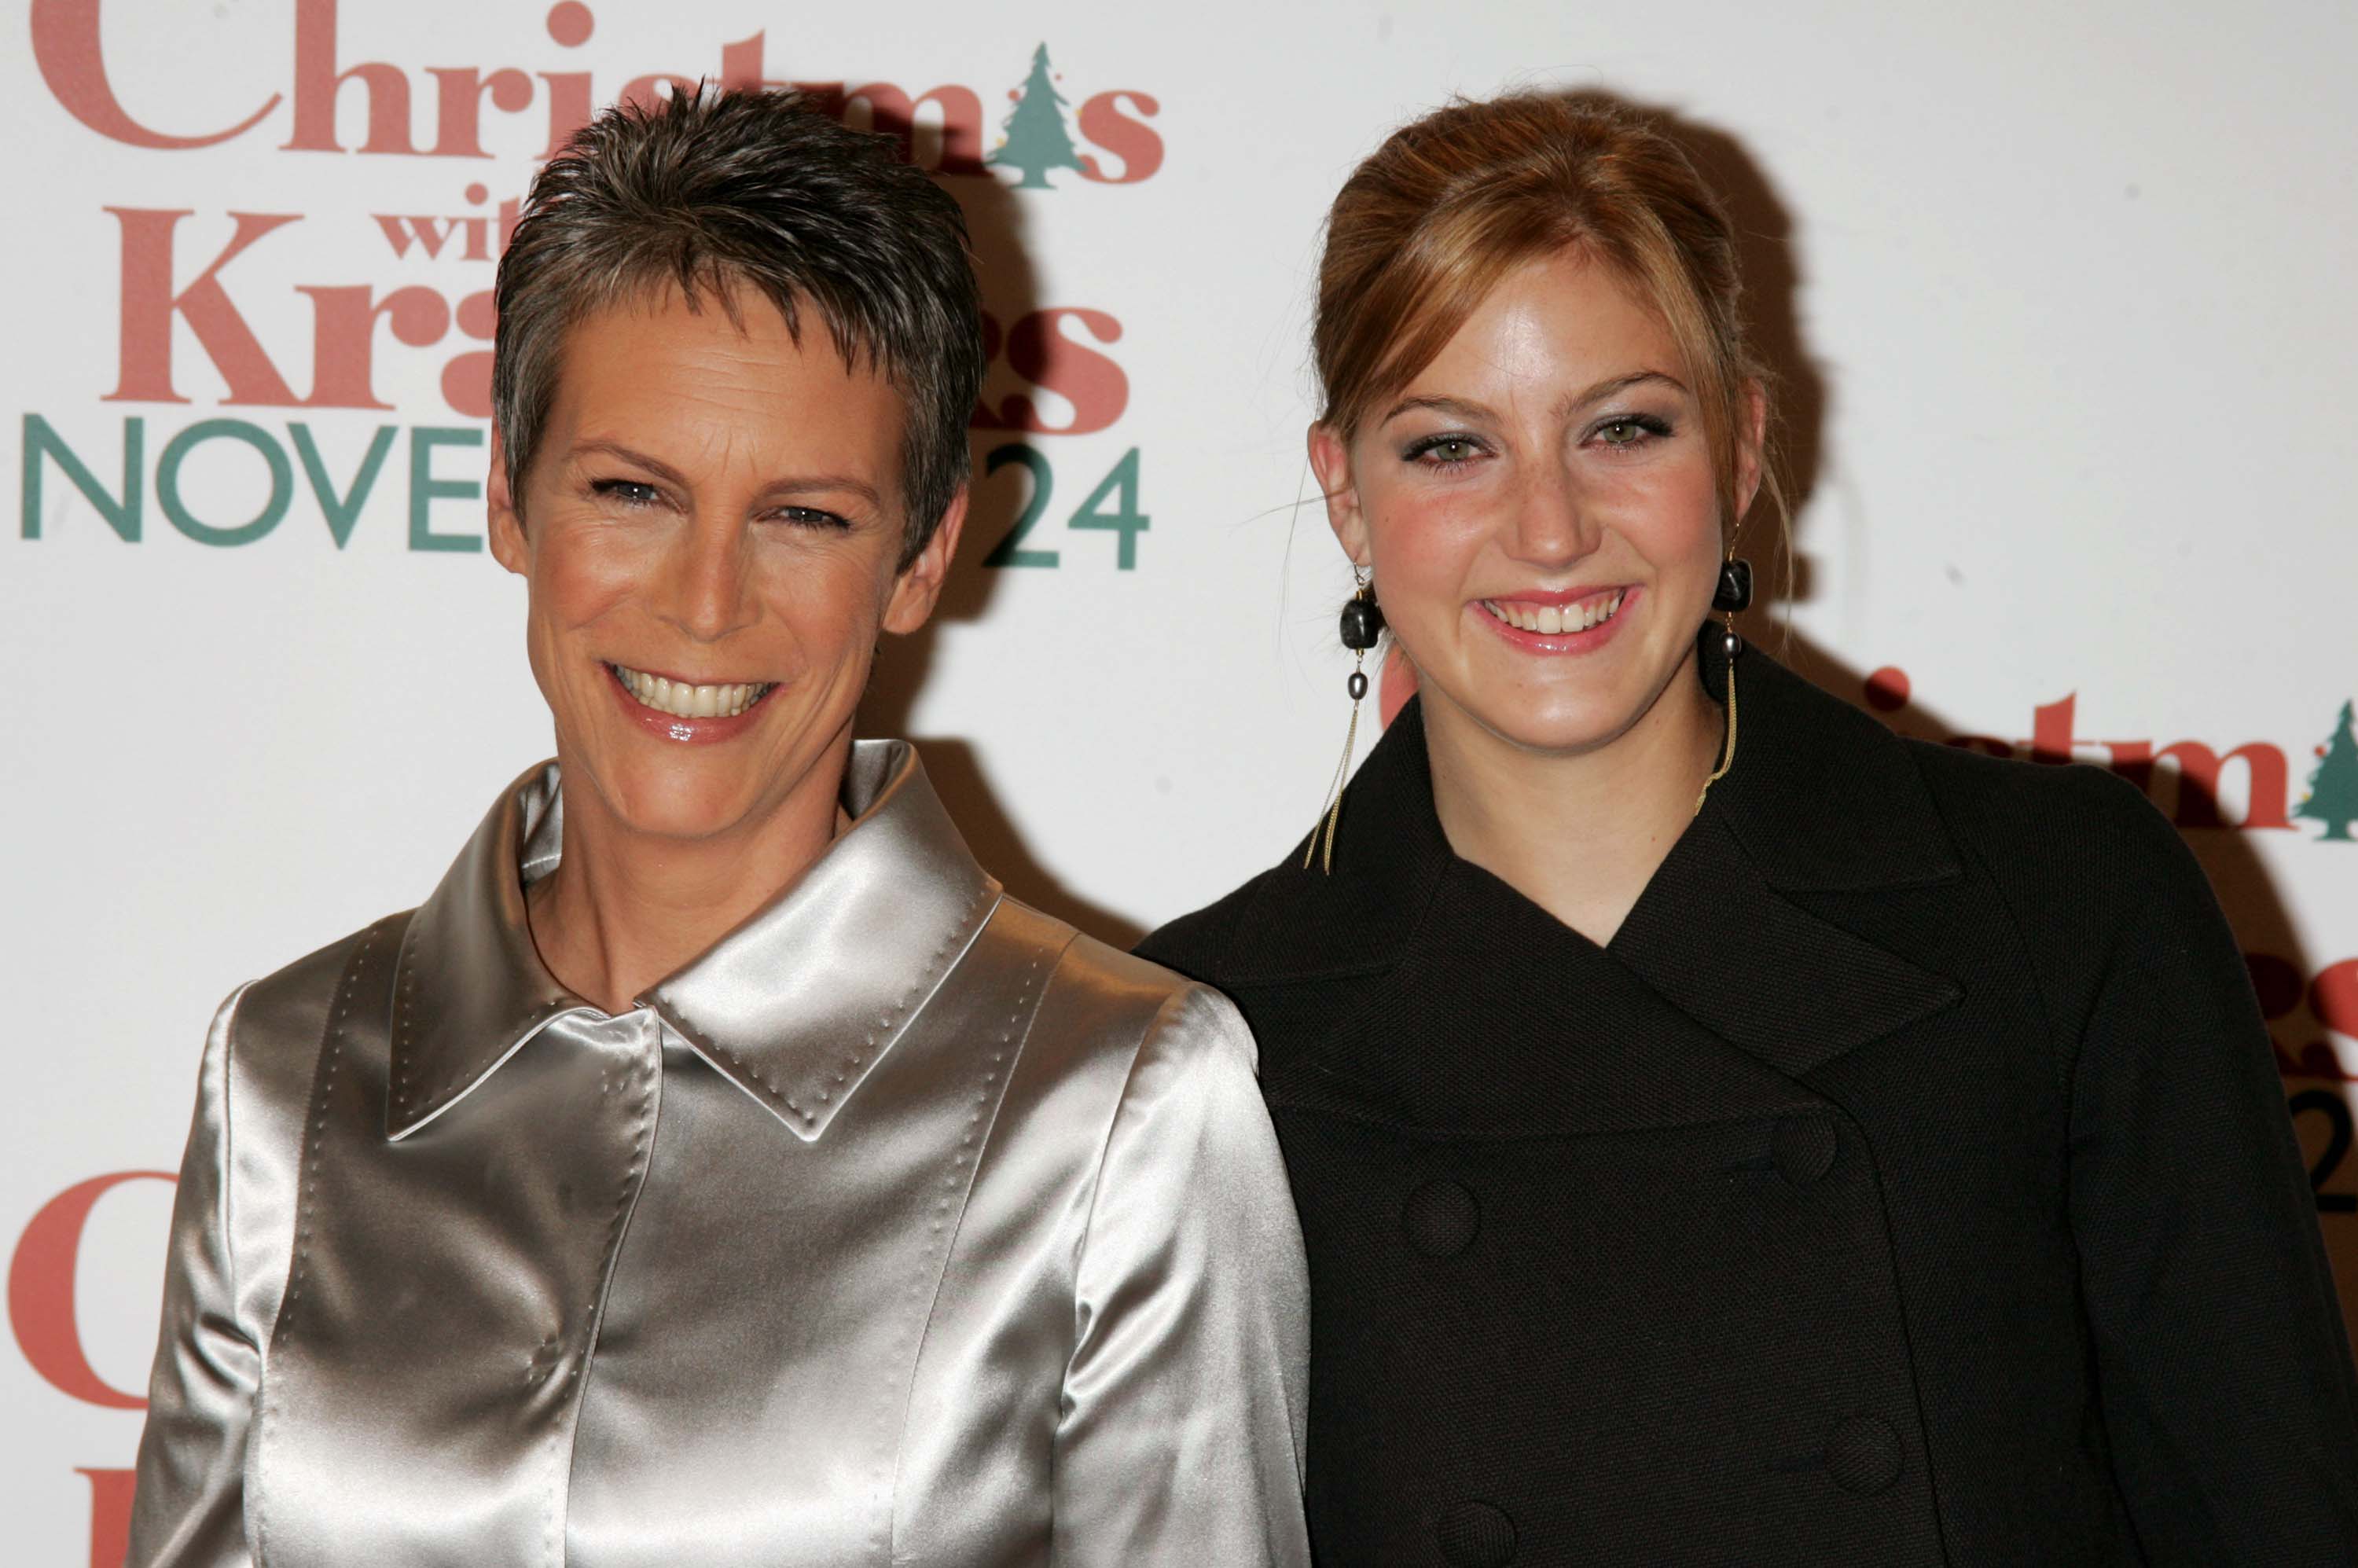 Jamie Lee Curtis and daughter during "Christmas with The Kranks" New York City Premiere in New York City. | Source: Getty Images